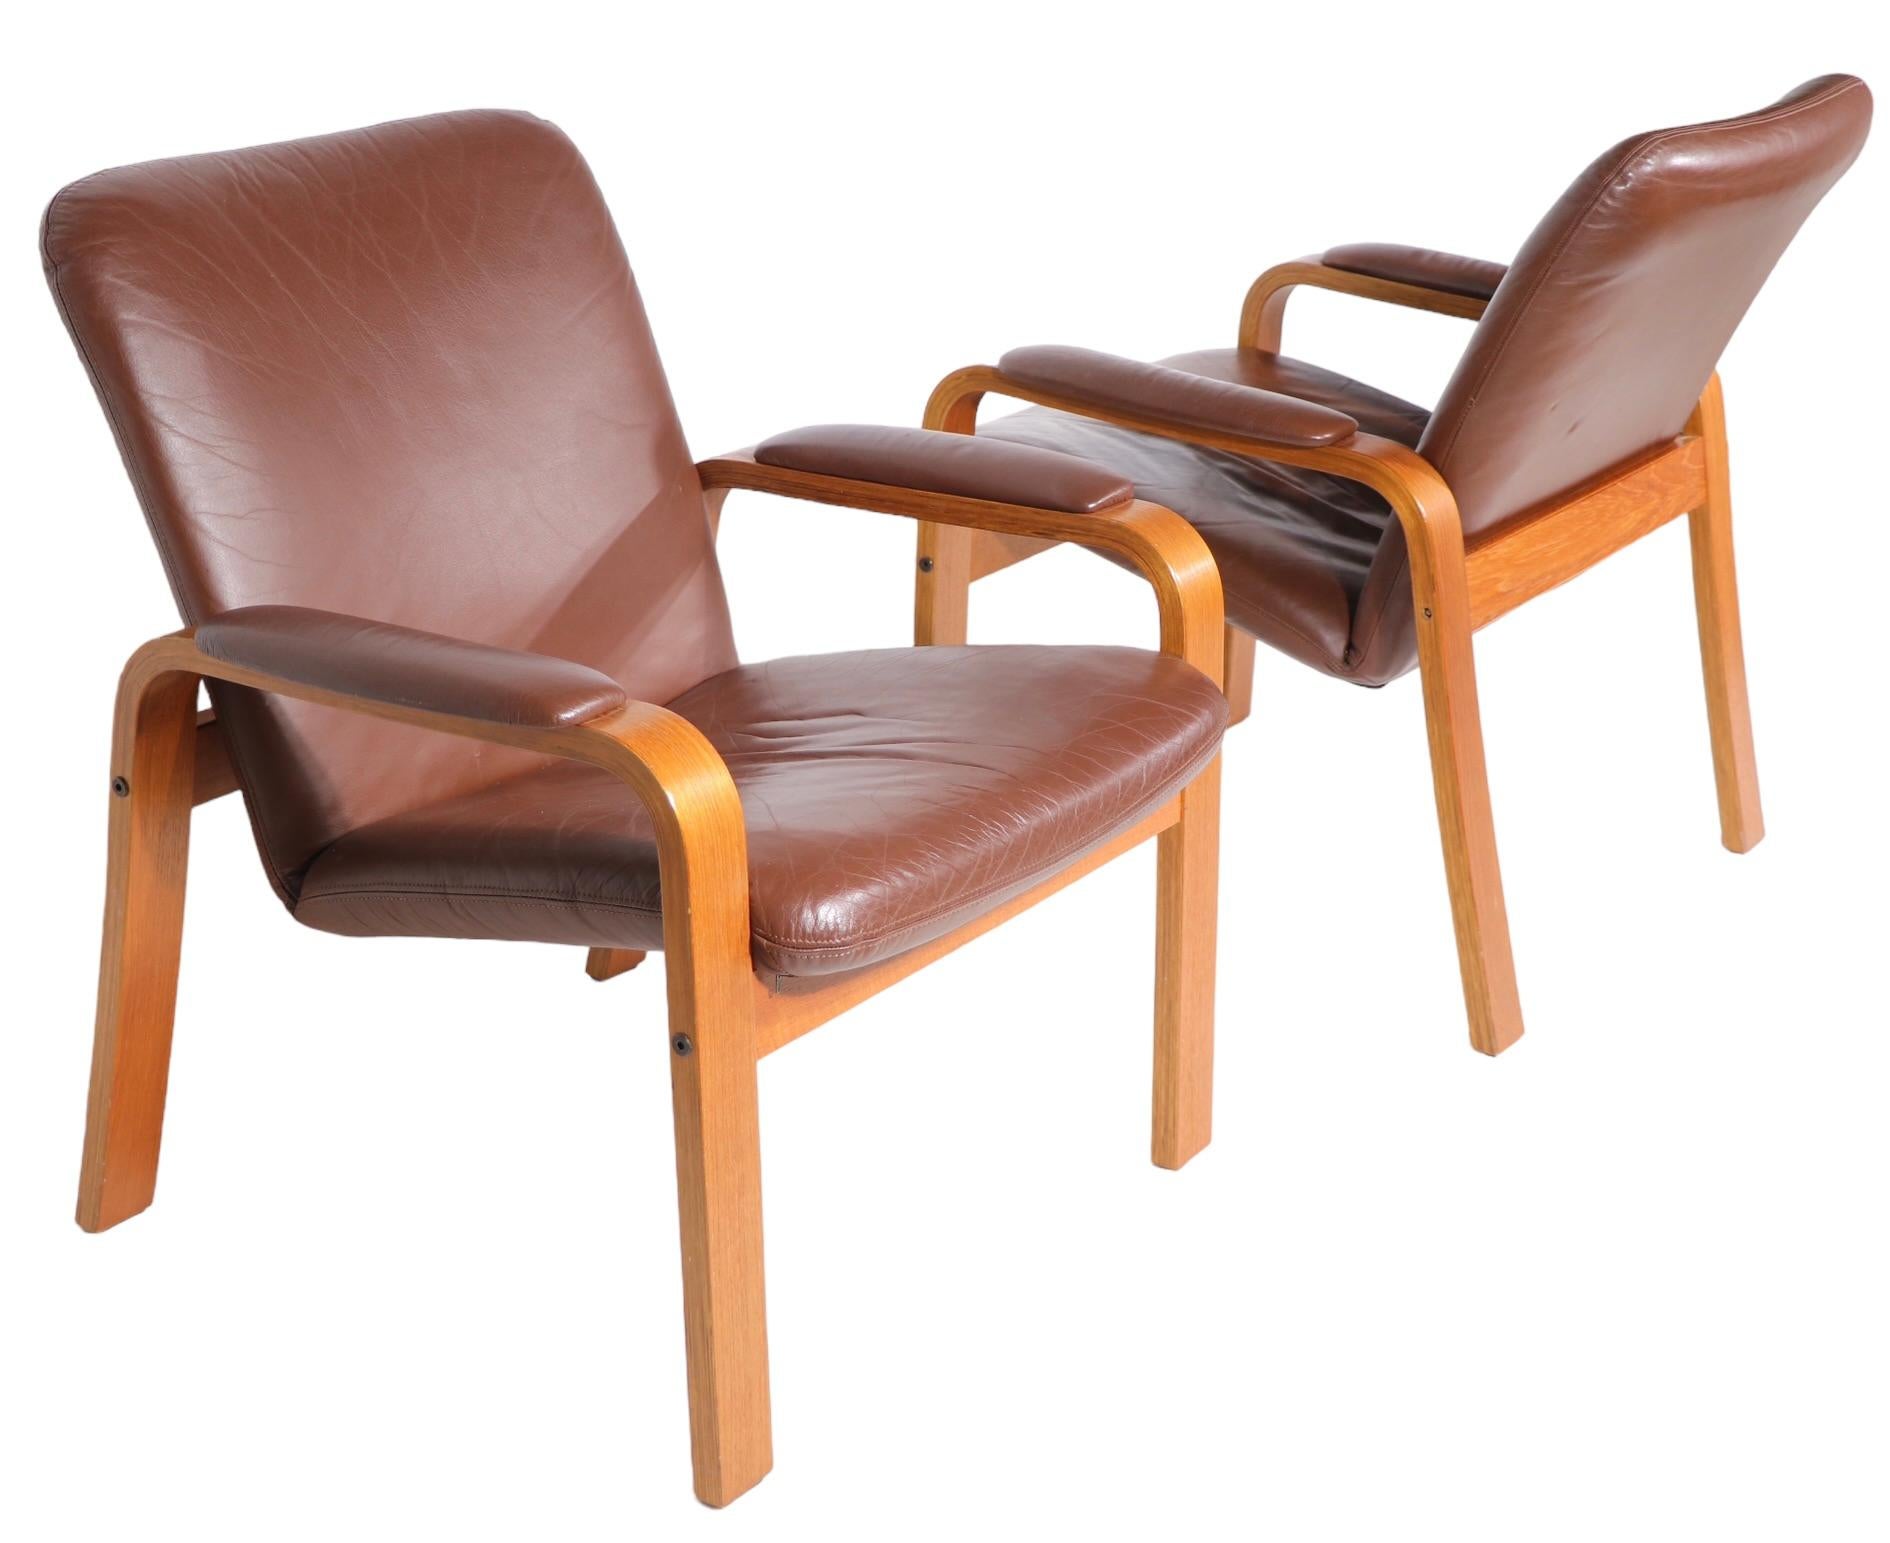 Pr. Scandinavian Mid Century Modern Lounge Arm Chairs Made in Norway by Ekorness For Sale 4